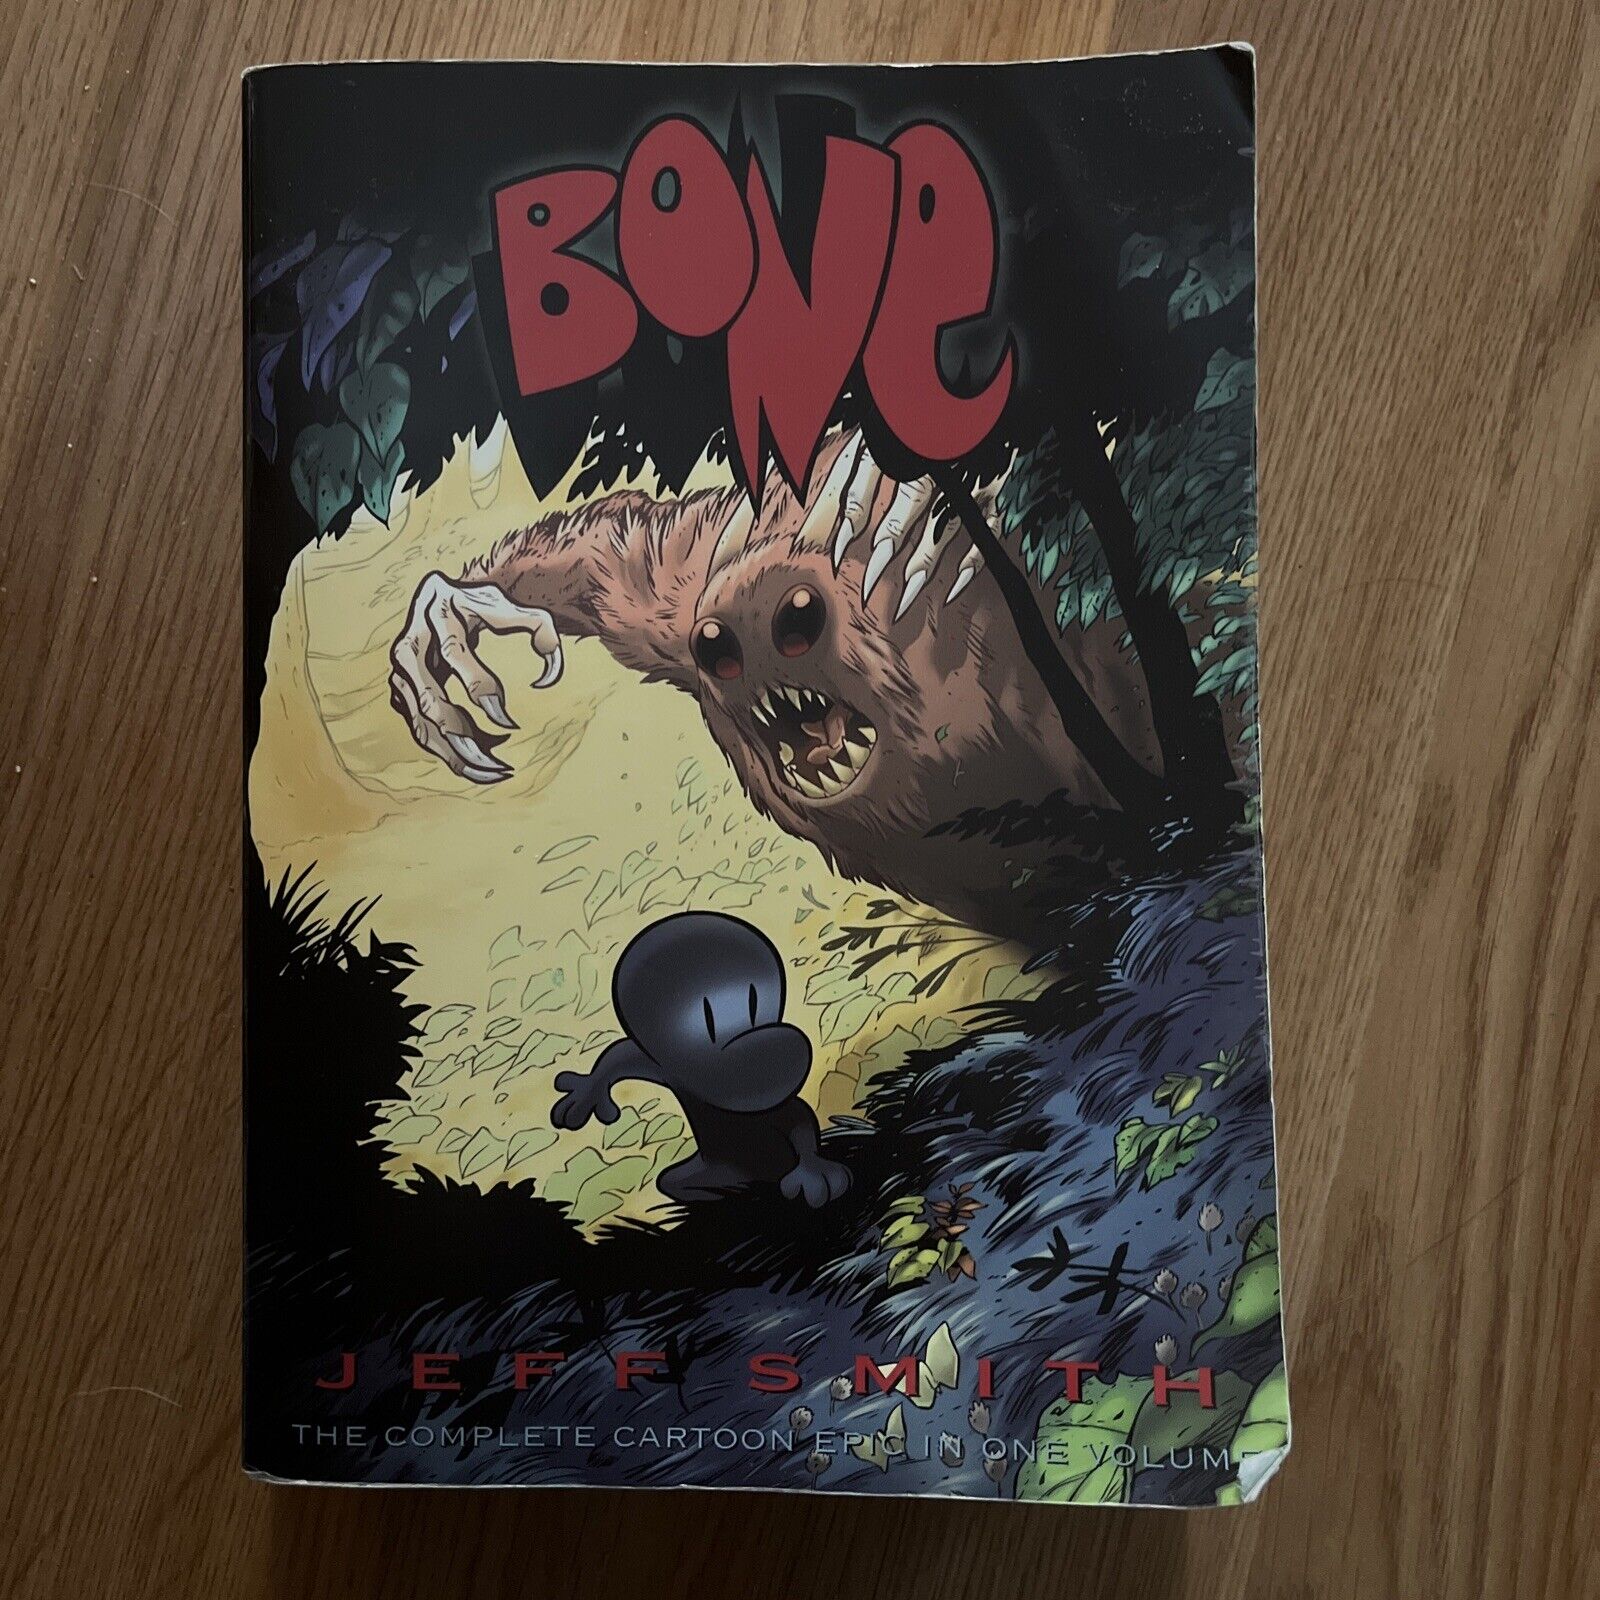 BONE THE COMPLETE CARTOON EPIC IN ONE VOLUME PAPERBACK JEFF SMITH READ